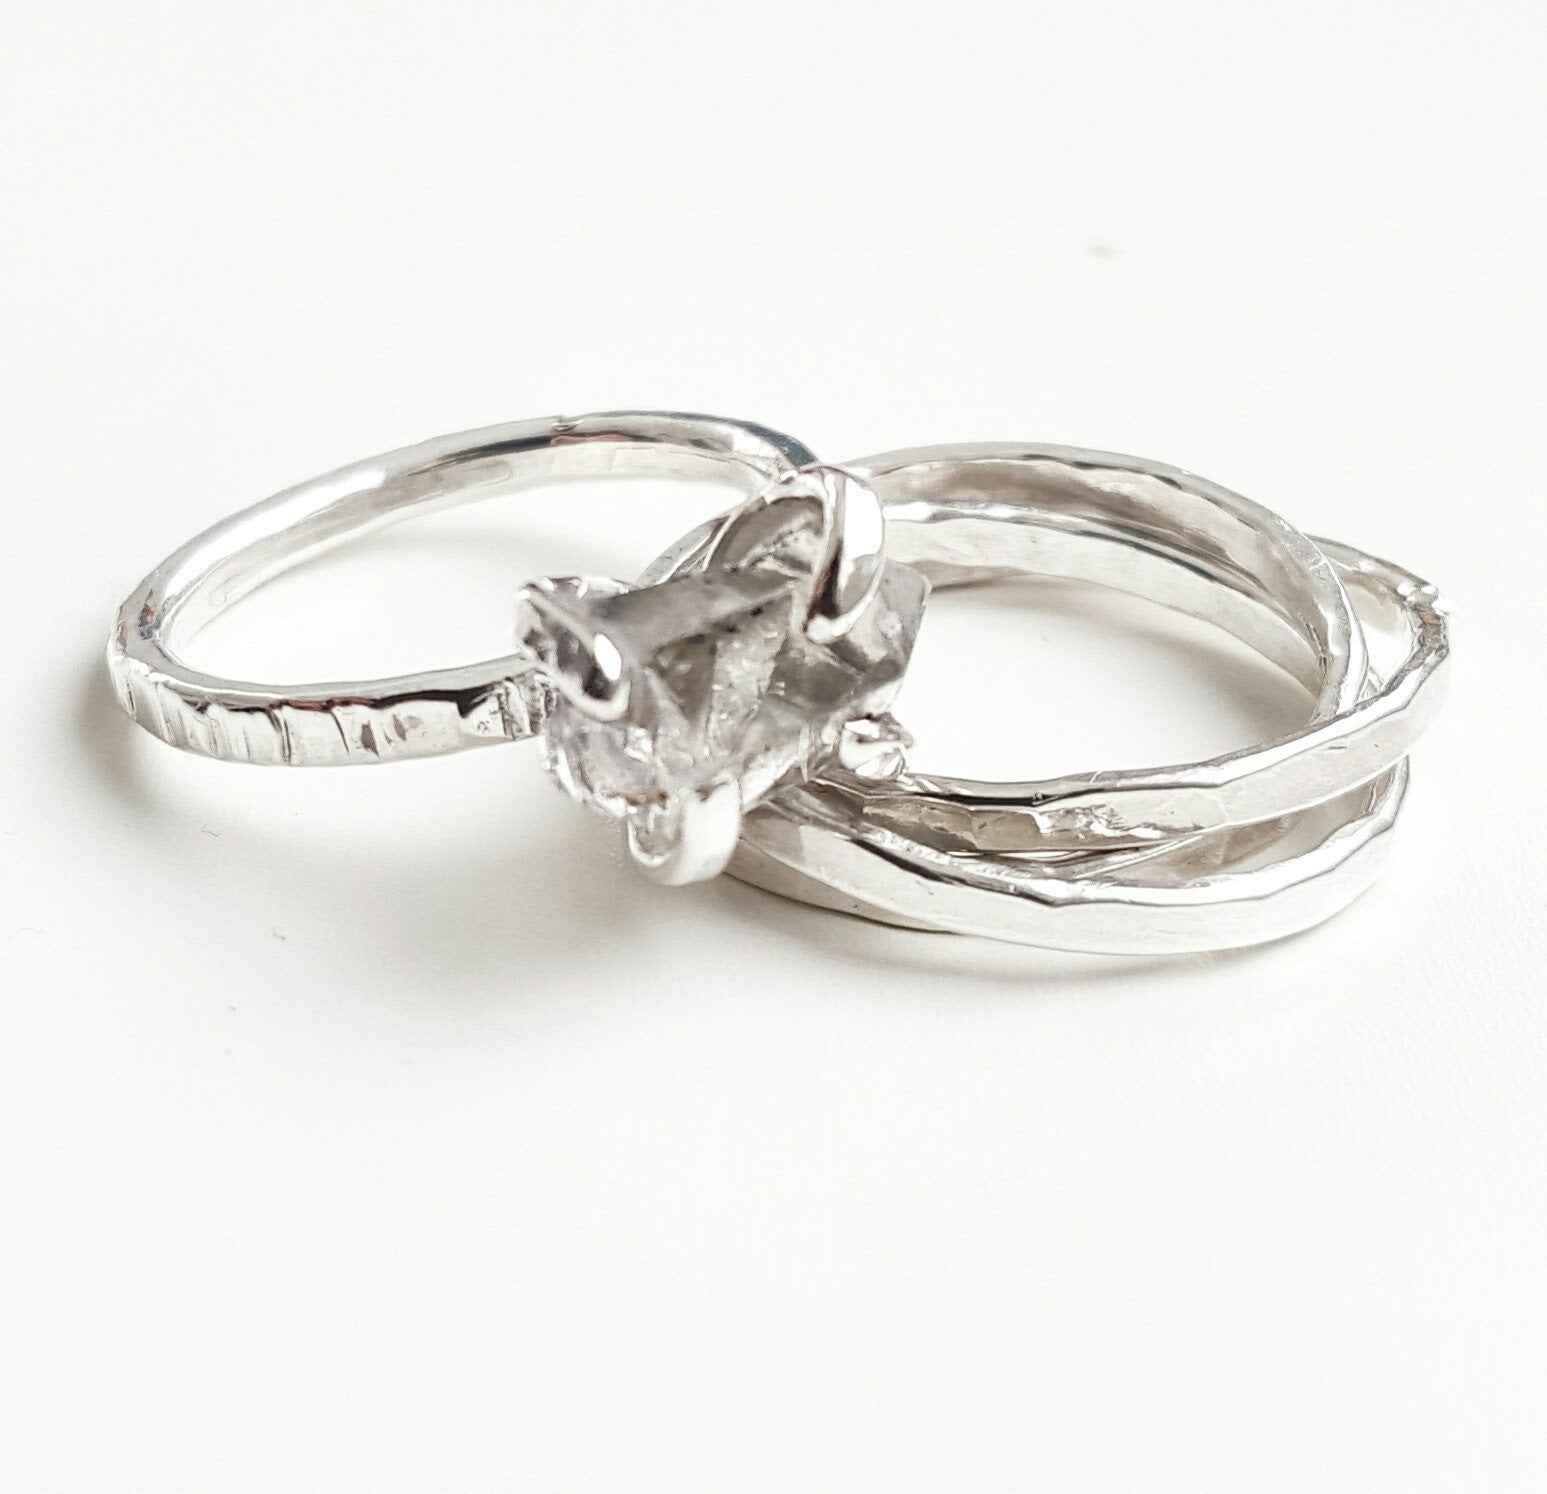 a set of intertwined silver band rings and a silver claw style herkimer diamond ring on a white background